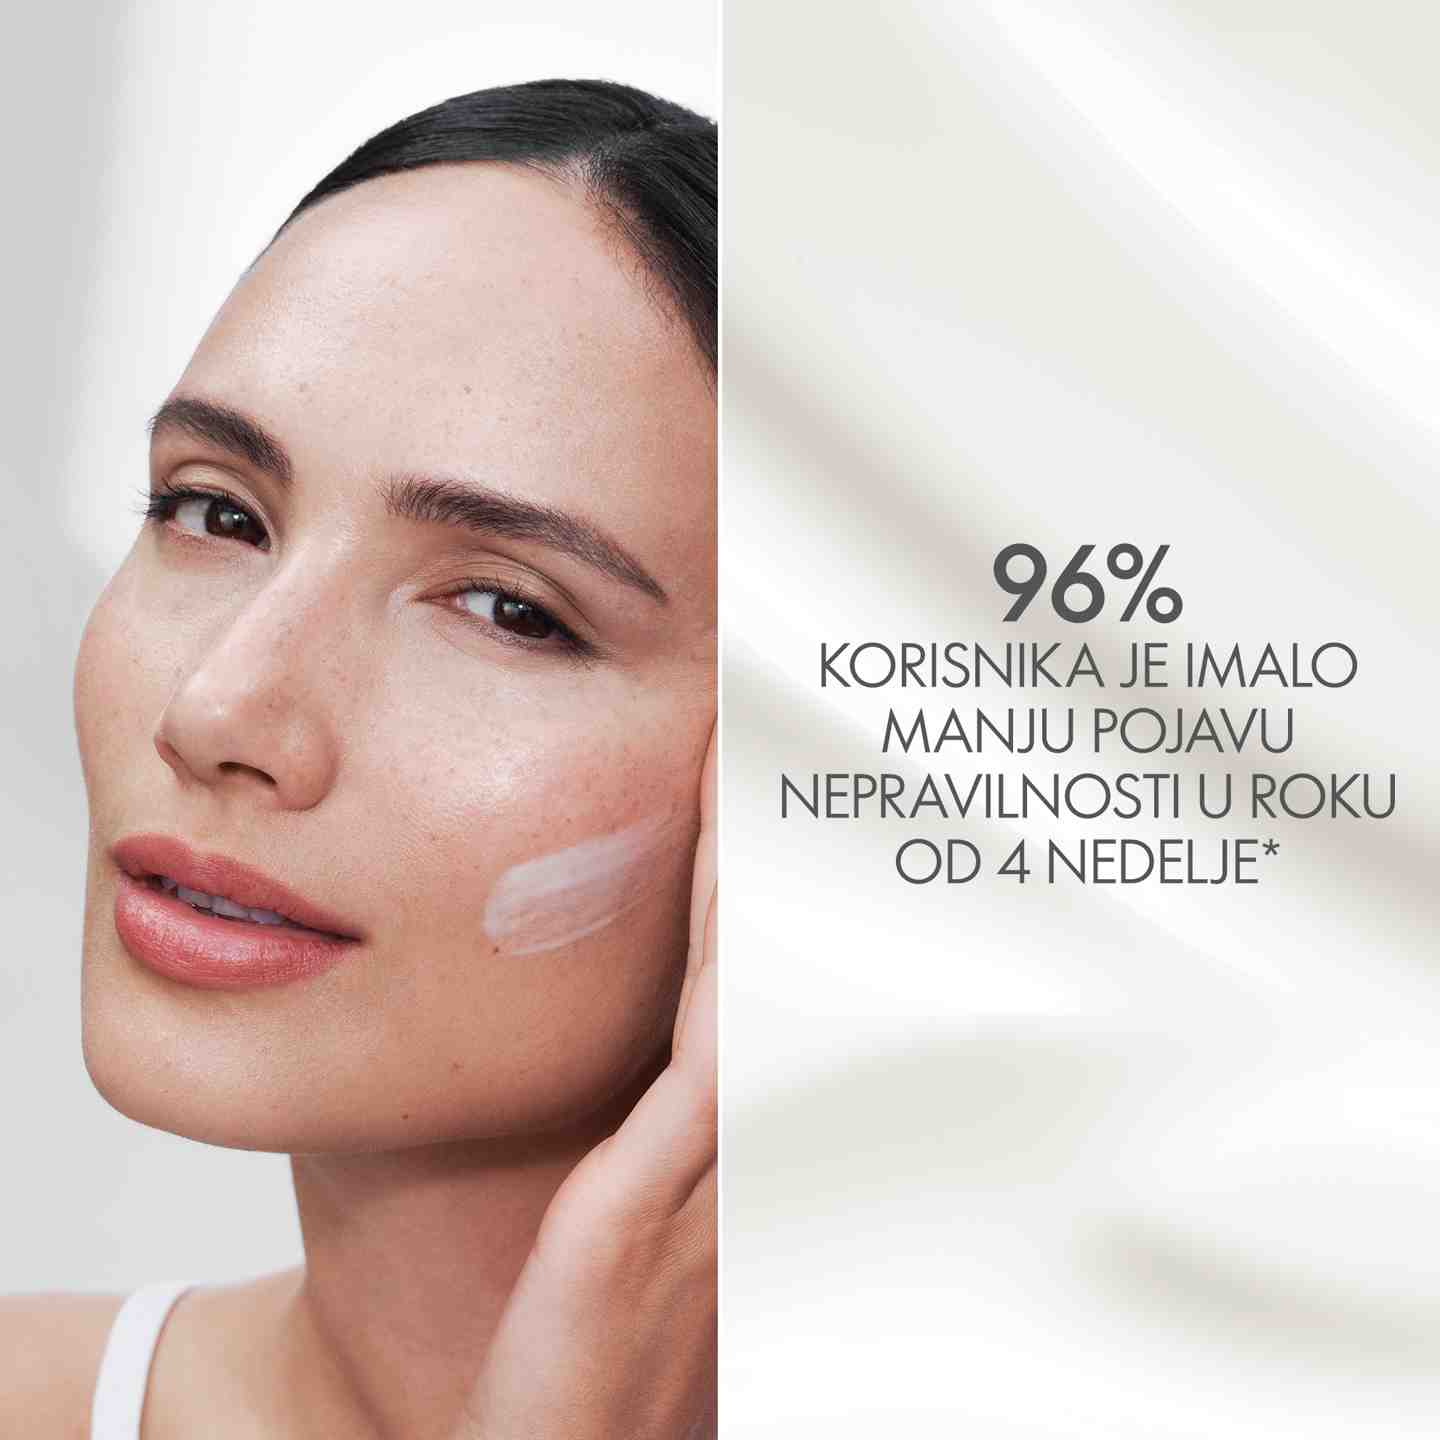 https://media-cdn.oriflame.com/productImage?externalMediaId=product-management-media%2fProducts%2f41039%2fME%2f41039_2.png&id=17551270&version=2